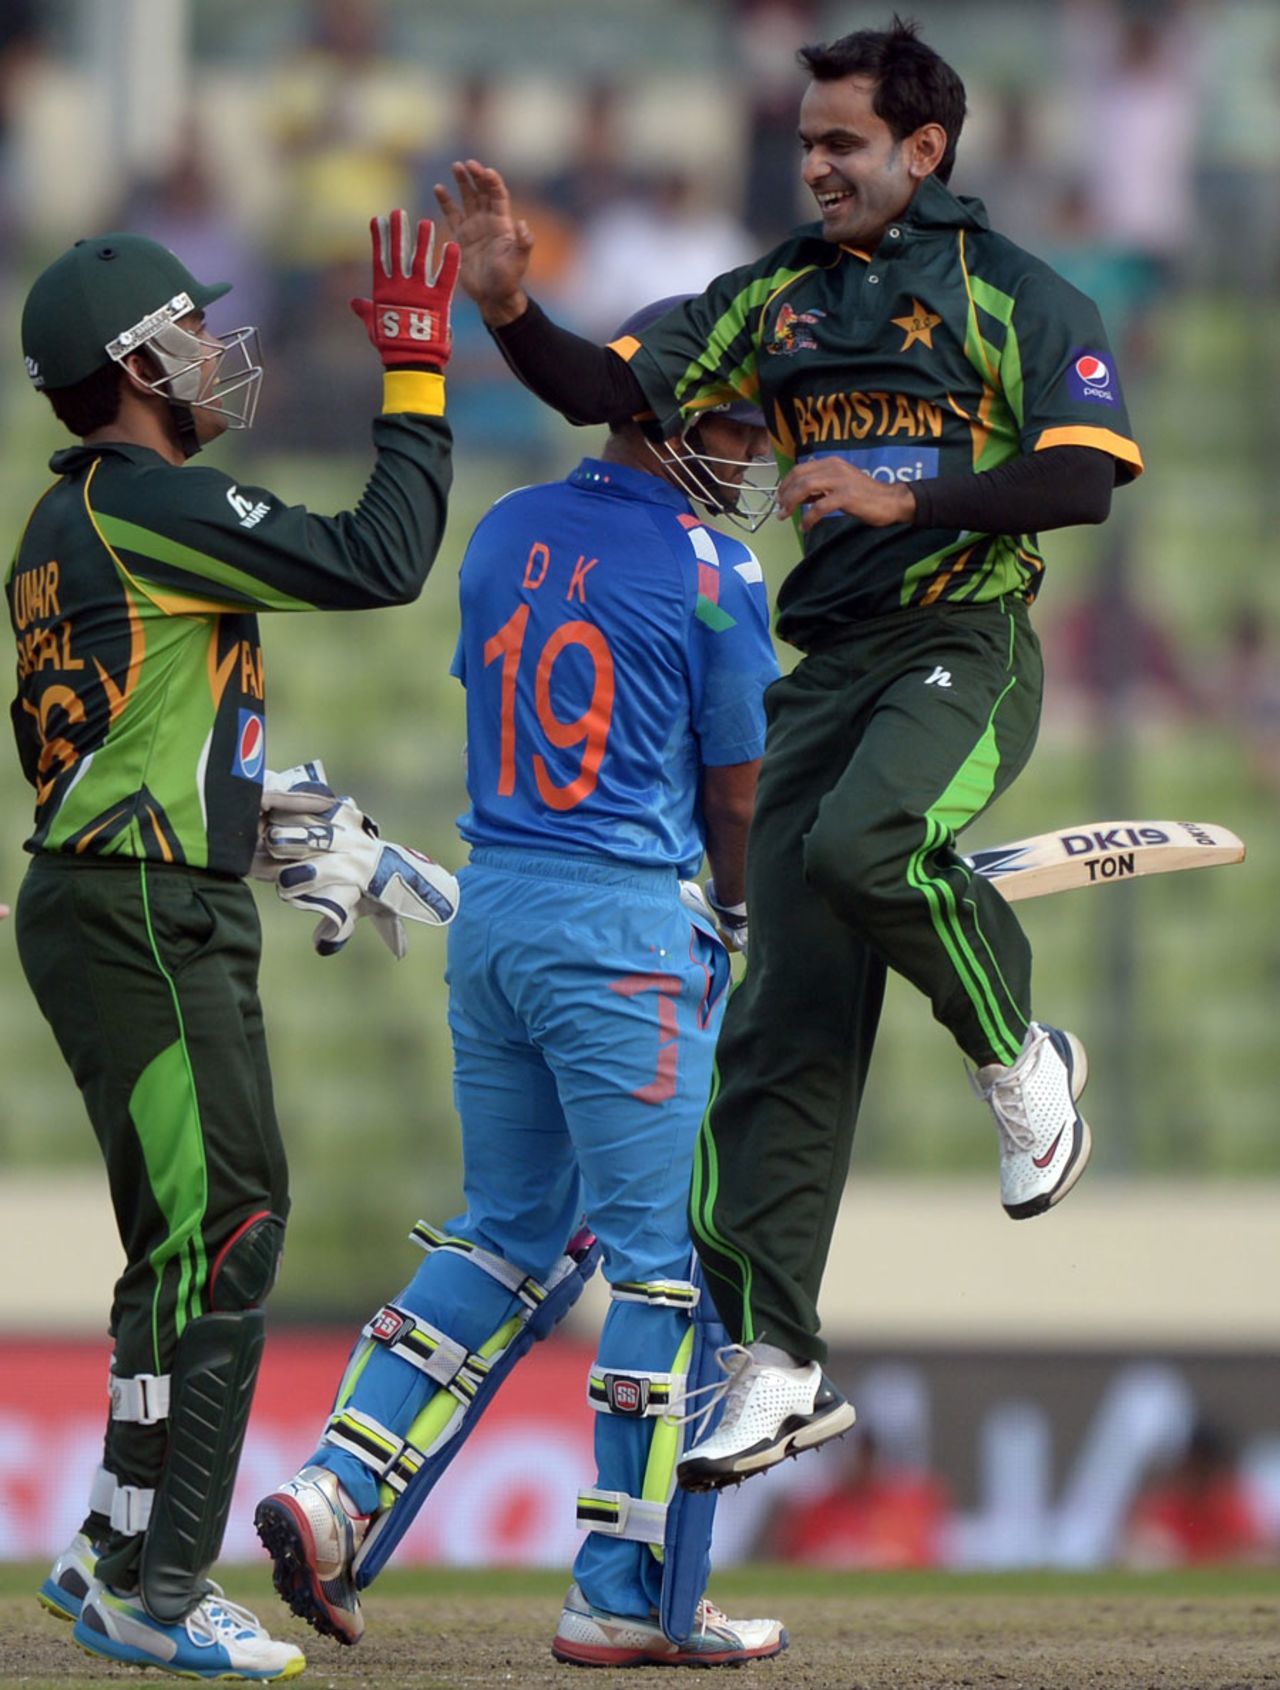 Mohammad Hafeez leaps in joy after dismissing Dinesh Karthik, India v Pakistan, Asia Cup, Mirpur, March 2, 2014